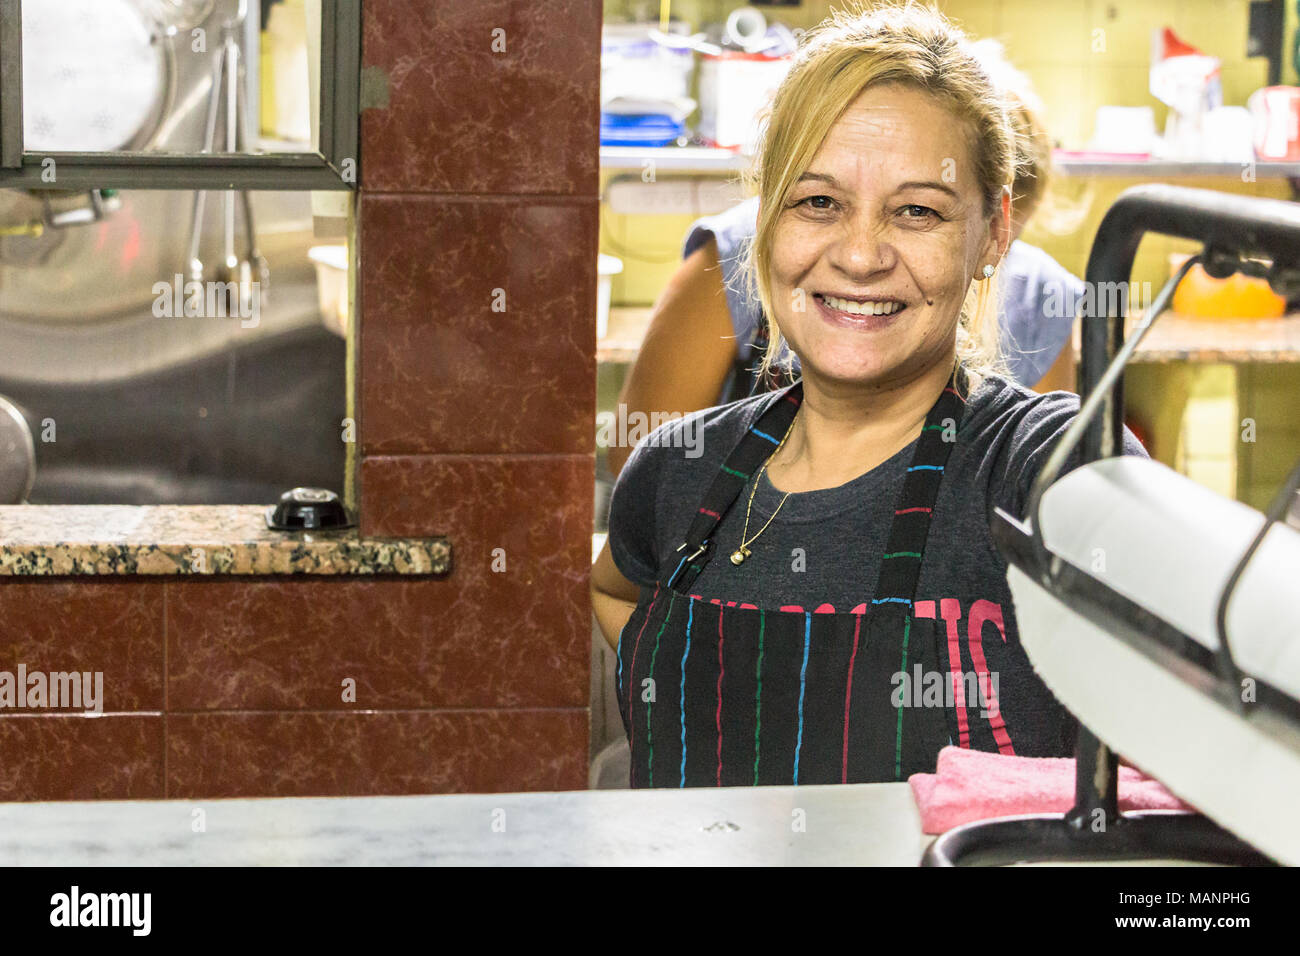 Buenos Aires, Argentina - March 20th, 2018: A female cook at the counter of the restaurant  - bodegon El Trebol in Villa Luro, Buenos Aires, Argentina Stock Photo